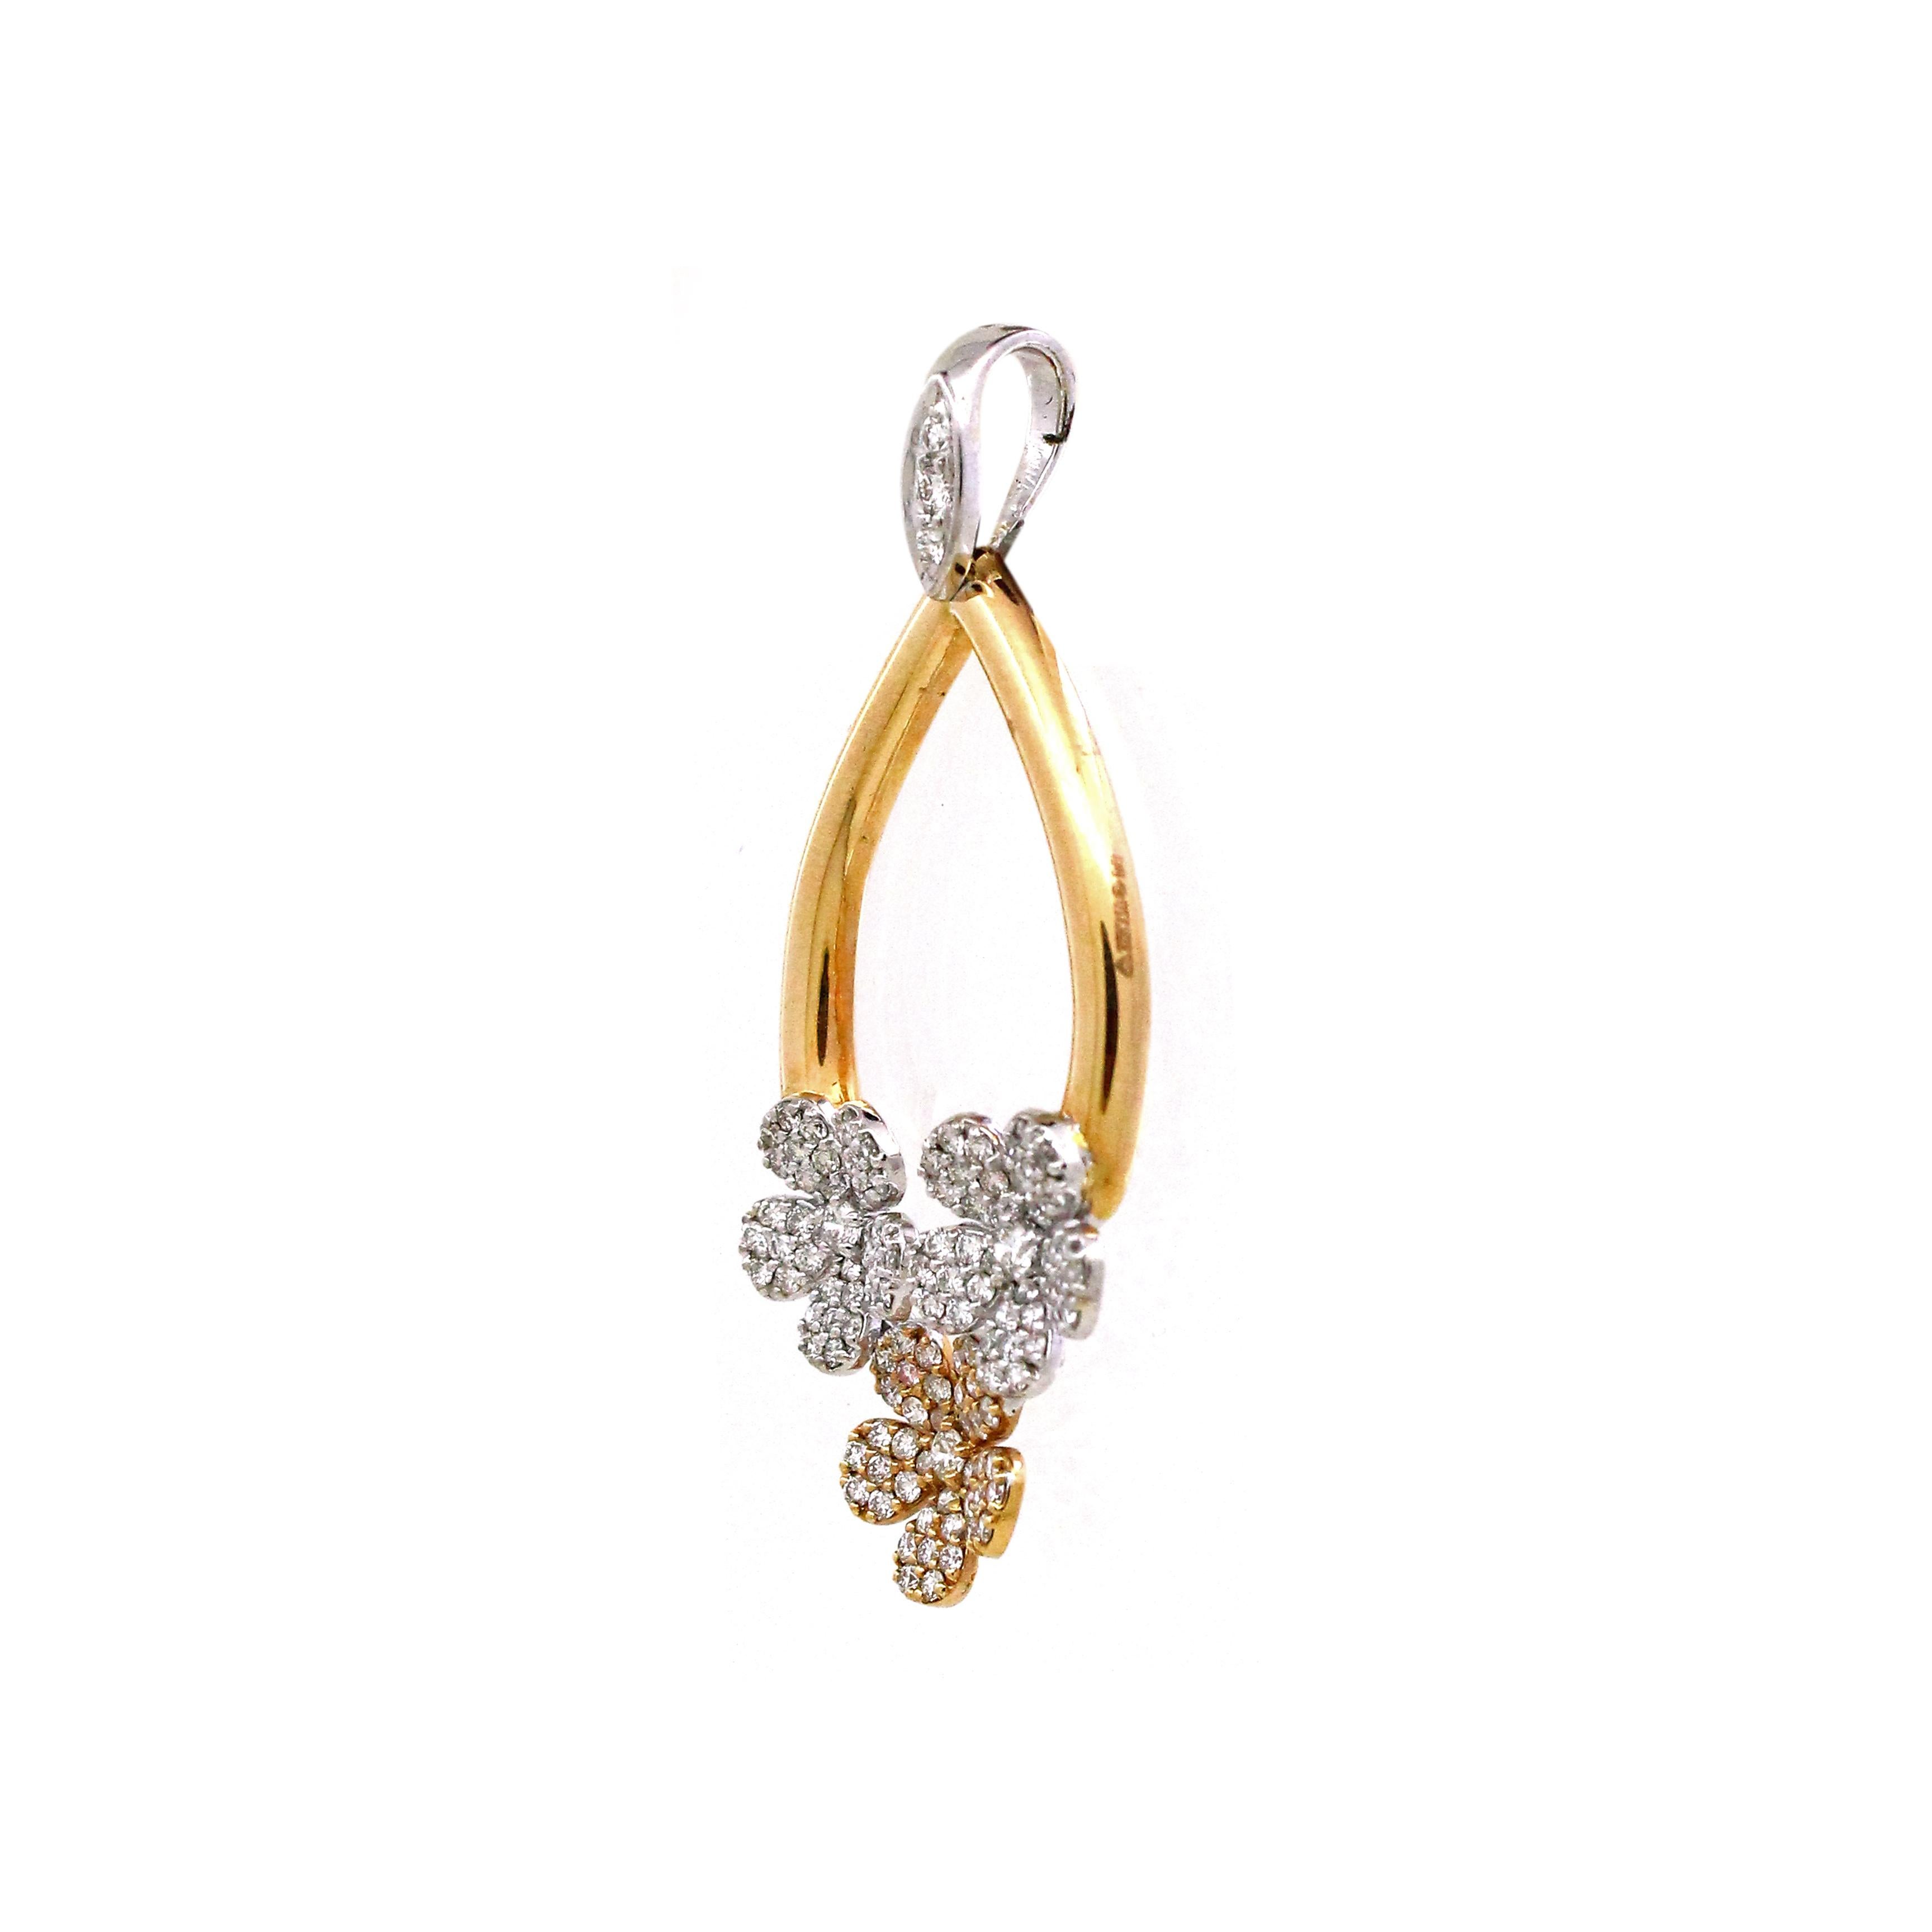 Discover the epitome of youthful elegance with our enchanting pendant, crafted from the finest 18k yellow and white gold, weighing a delicate 3.63 grams. Embodying a timeless charm, this pendant boasts three distinct flower-shaped clusters, each